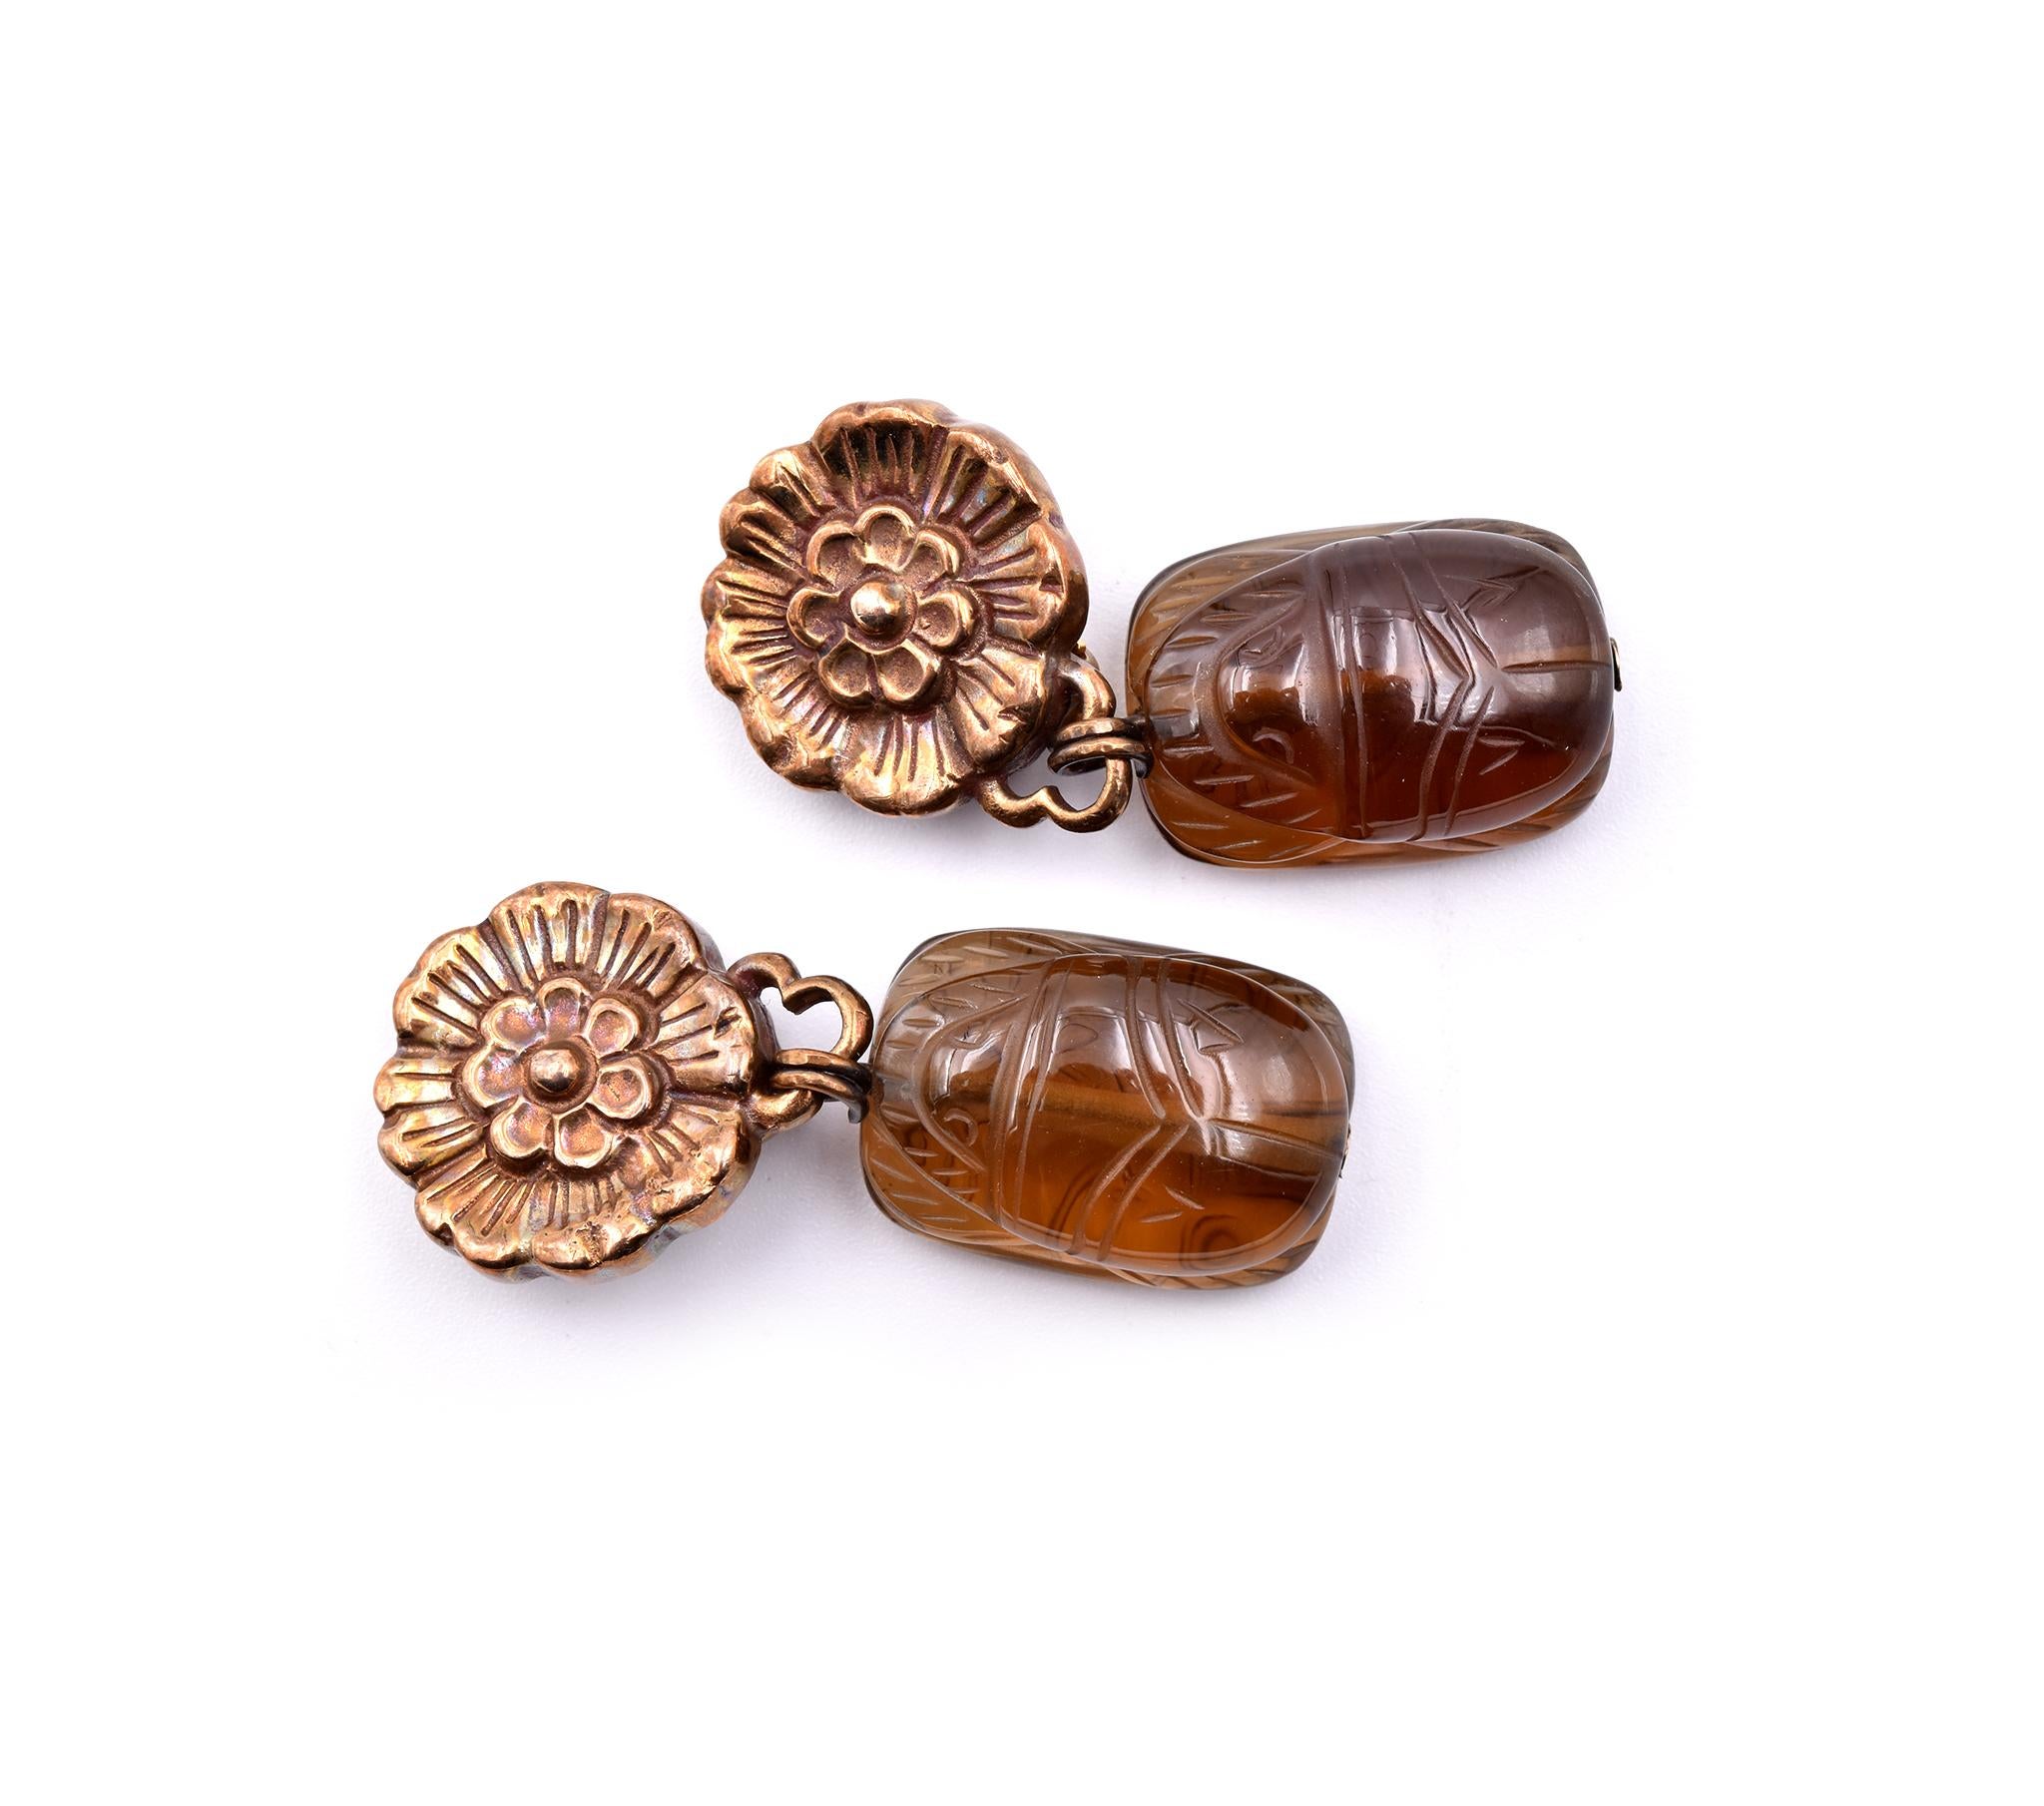 Designer: Stephen Dweck
Material: sterling silver
Gemstone: 2 carved smoky topaz
Dimensions: earrings measure 45mm x 16.95mm
Fastening: clip on
Weight: 15.50 grams	
